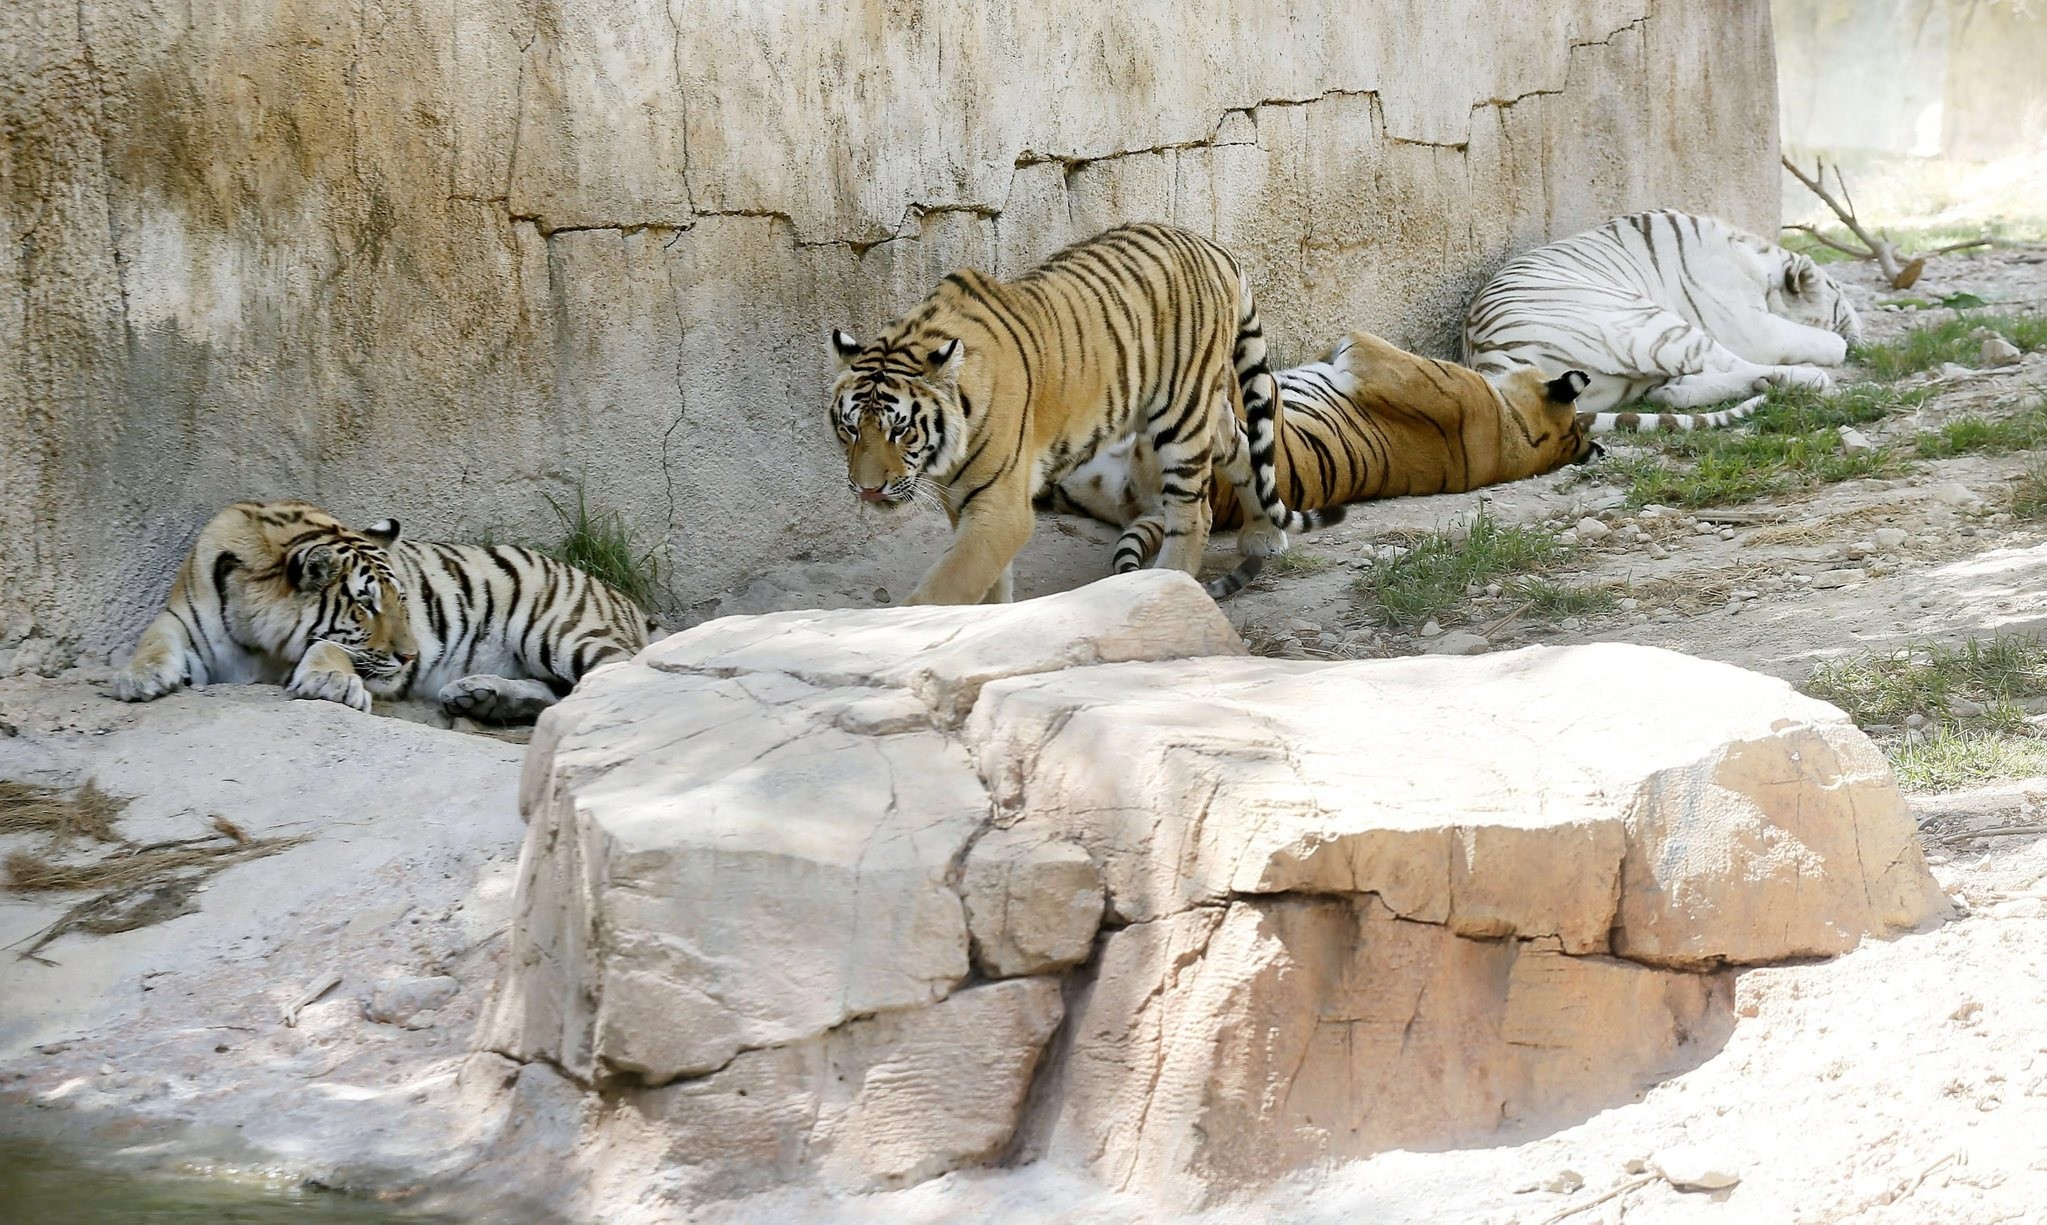 Tigers in an enclosure at Terra Natura animal park in Benidorm, eastern Spain, 03 July 2016, one day after a zookeeper was found dead. (EPA Photo) 